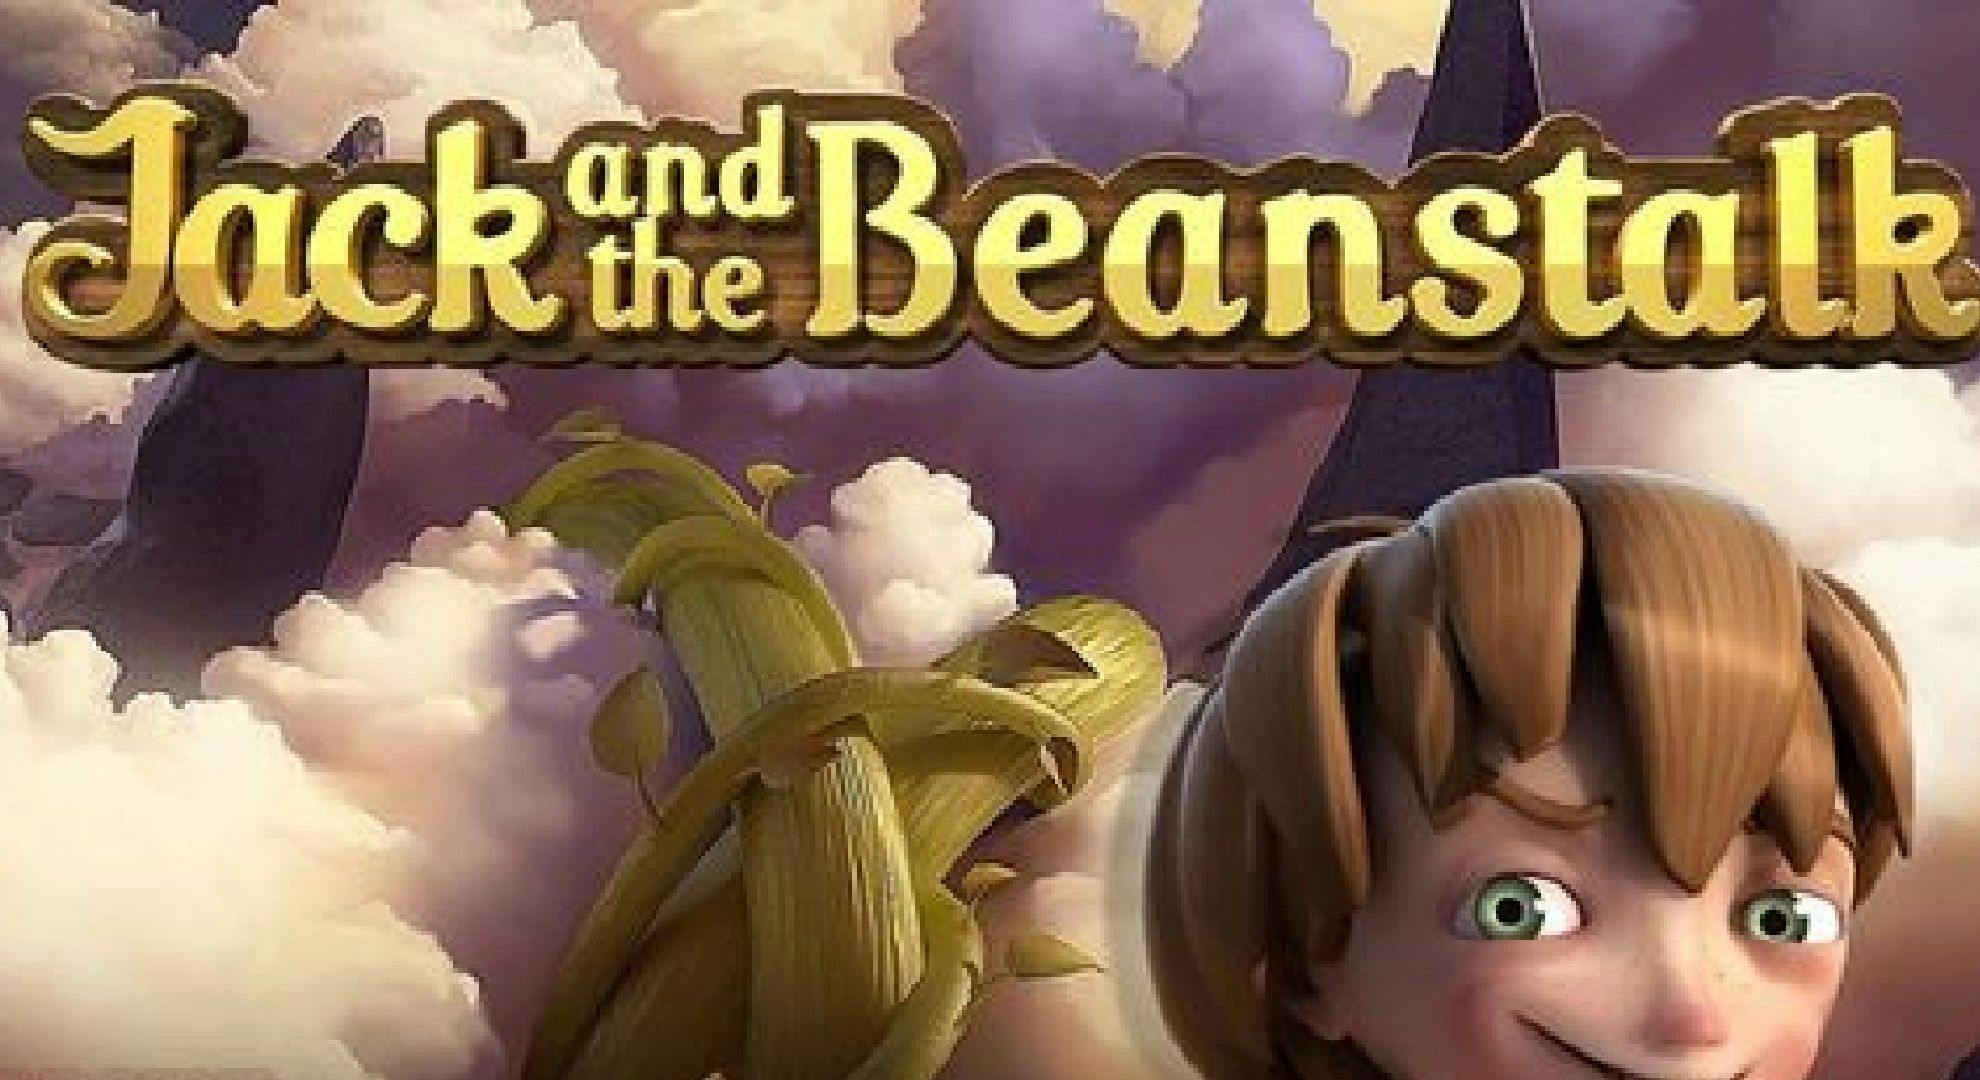 Jack and the Beanstalk Slot Online Free Play